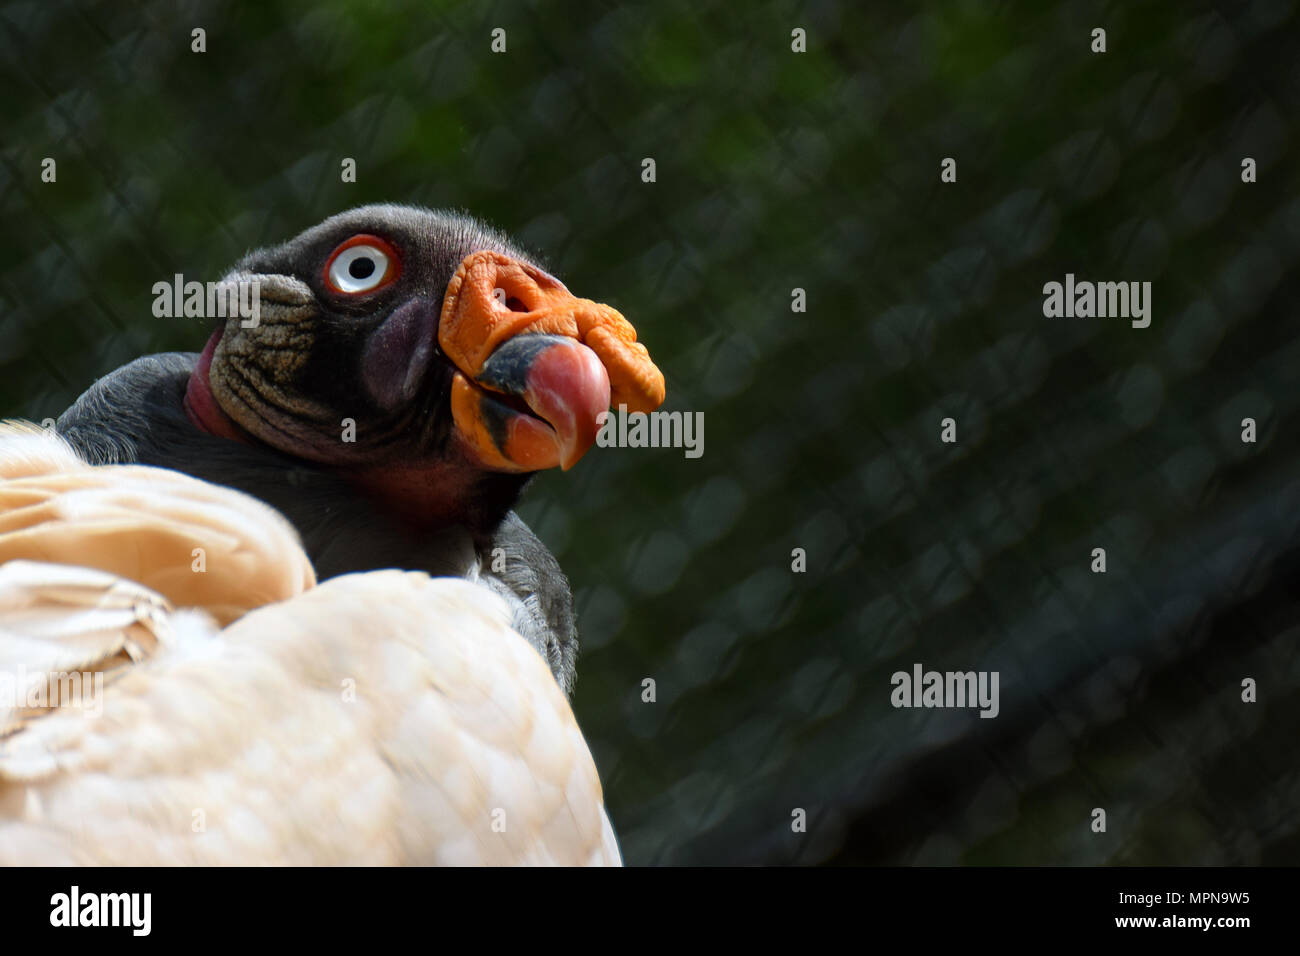 King vulture (Sarcoramphus papa) close up. Green blurred background. Stock Photo